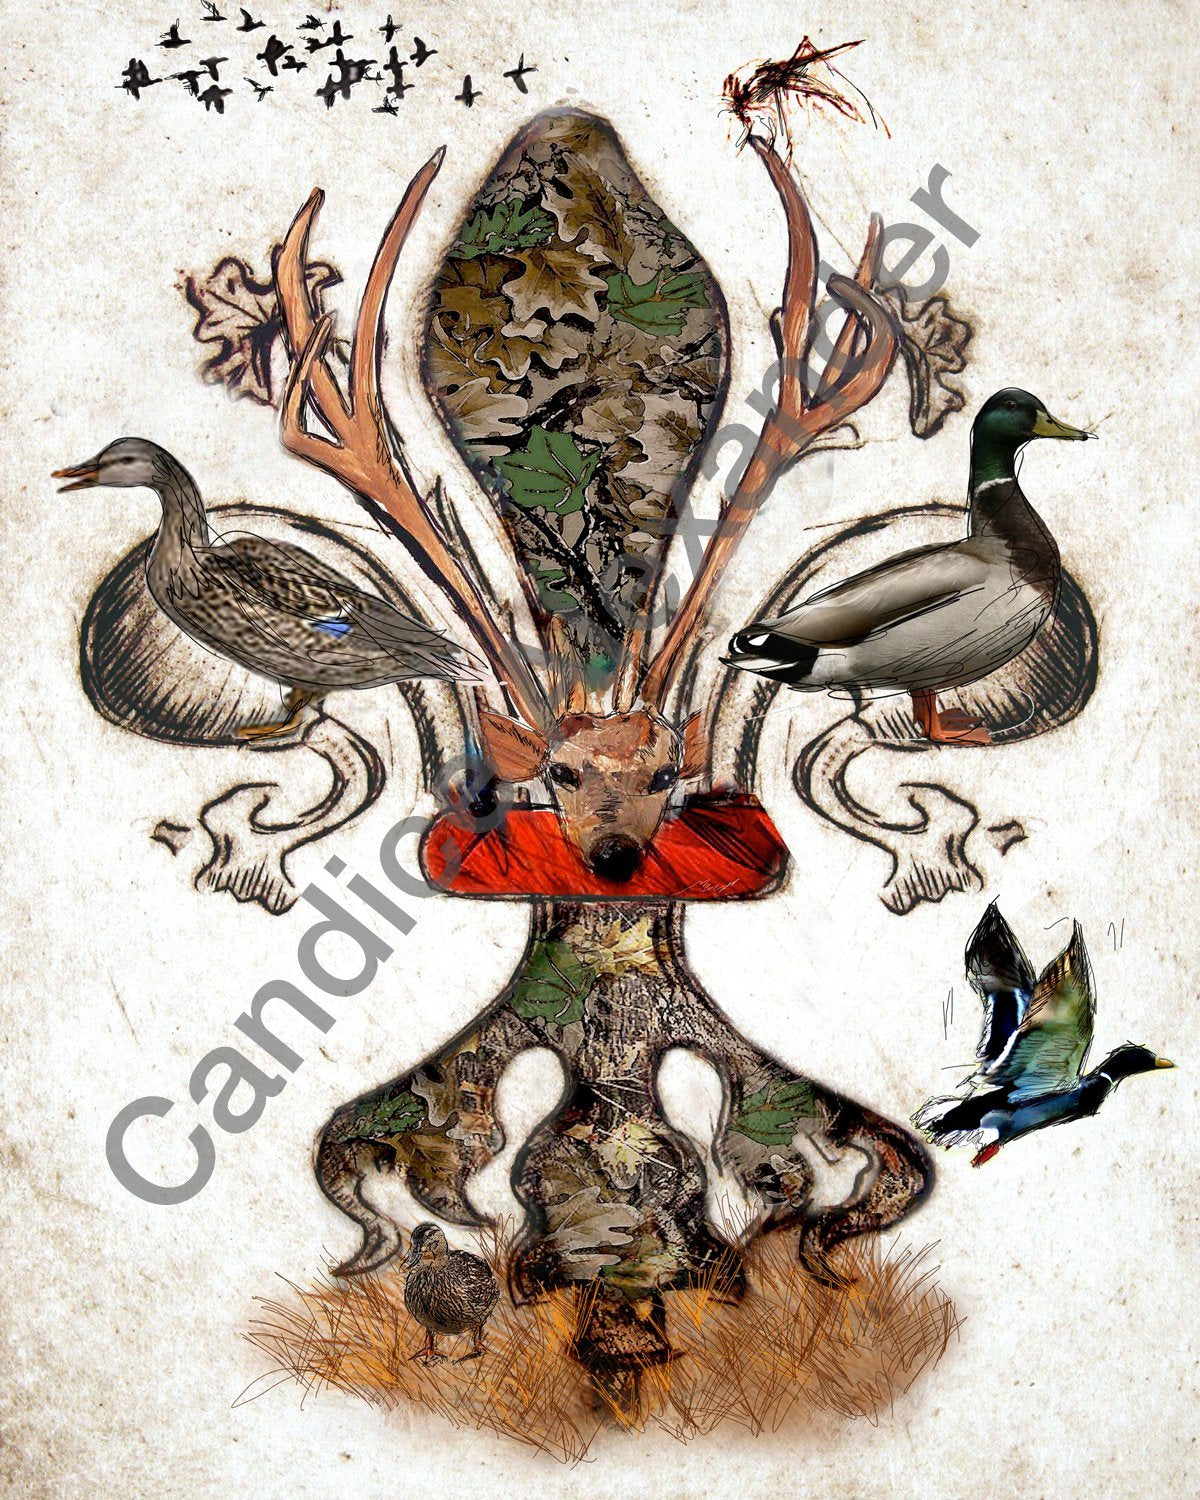 The Hunted with Ducks fleur de lis by Candice Alexander Fleur De Lis art by Candice Alexander, Louisiana Artist